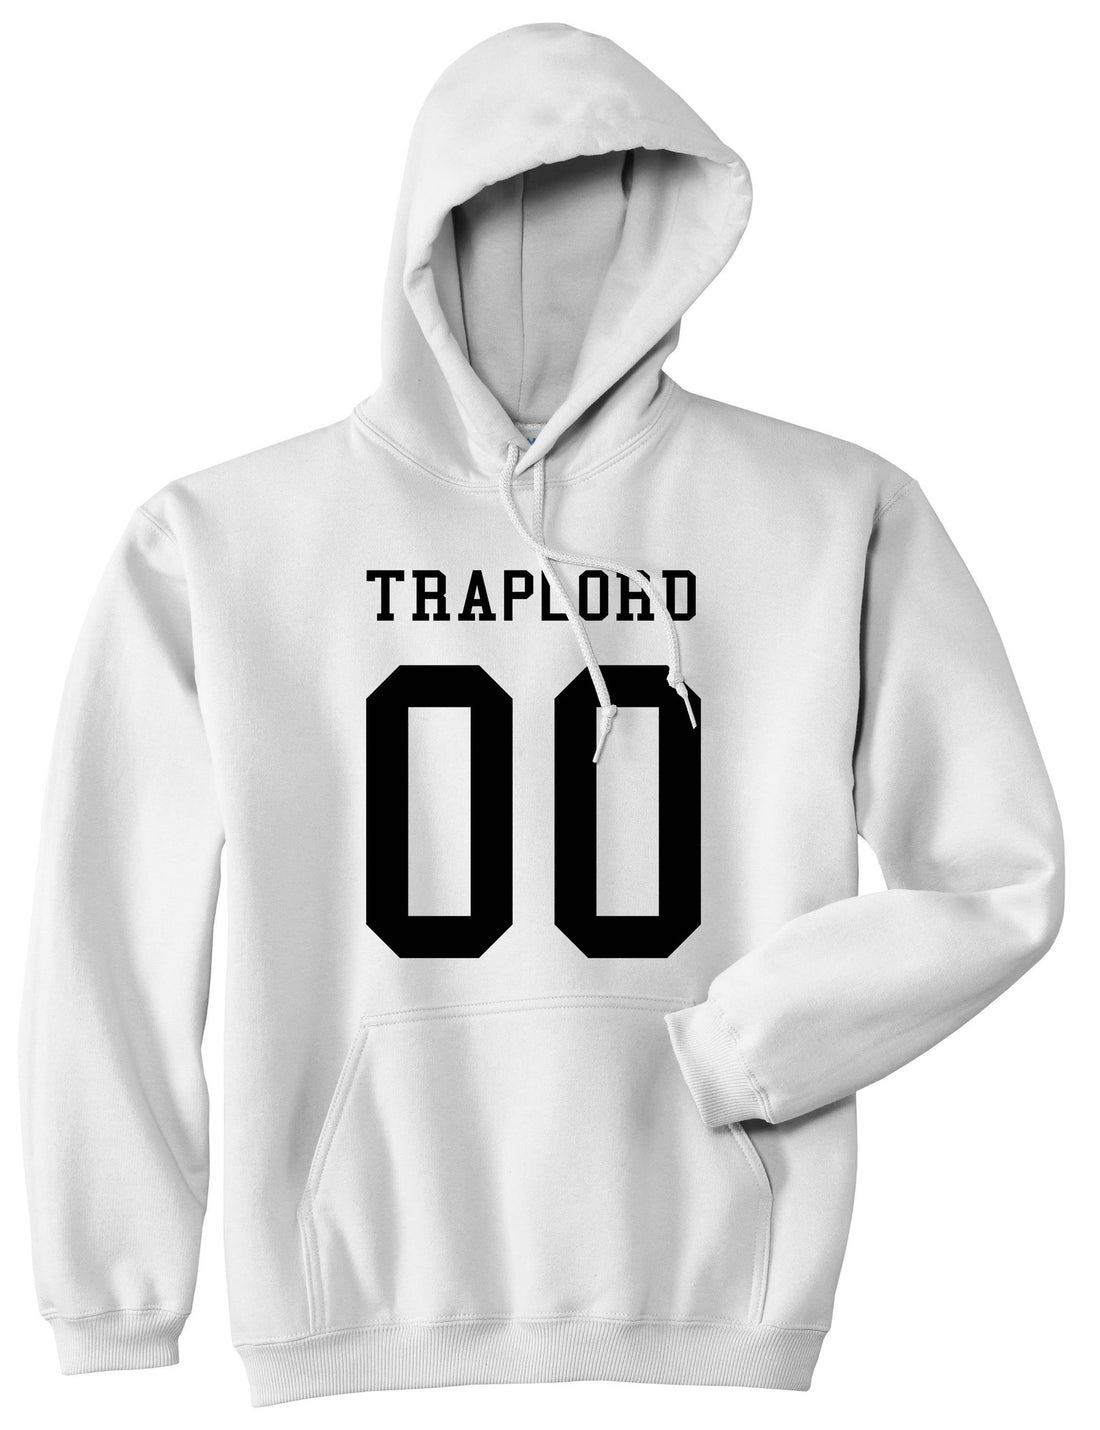 Traplord Team Jersey 00 Trap Lord Pullover Hoodie in White By Kings Of NY